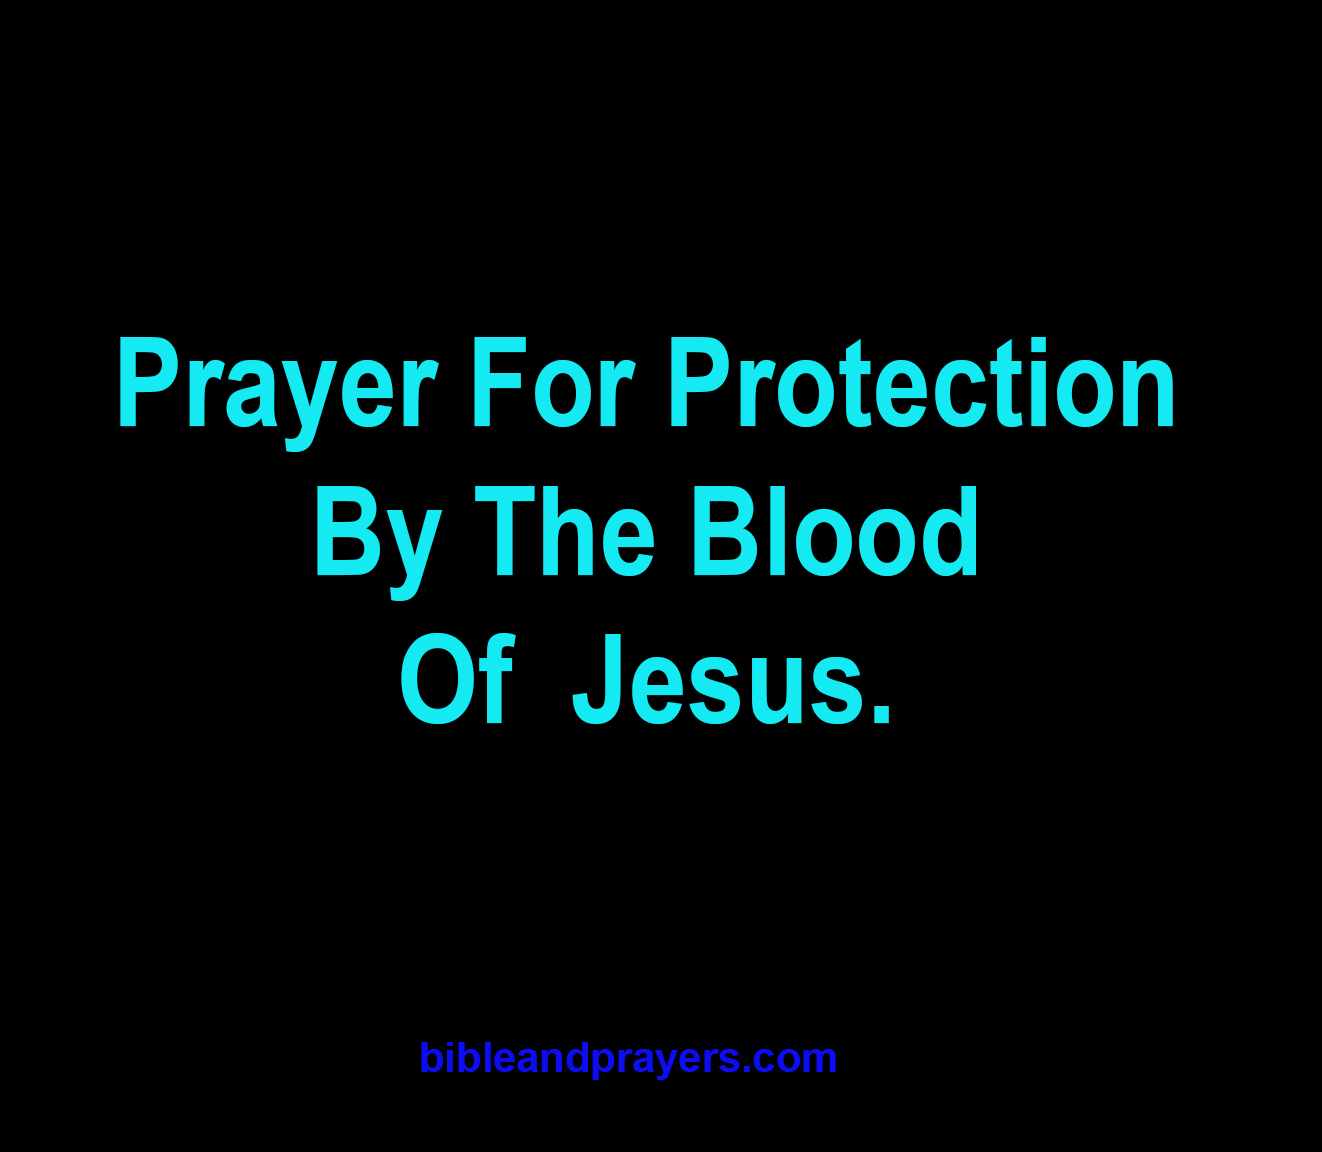 Prayer For Protection By The Blood Of Jesus.